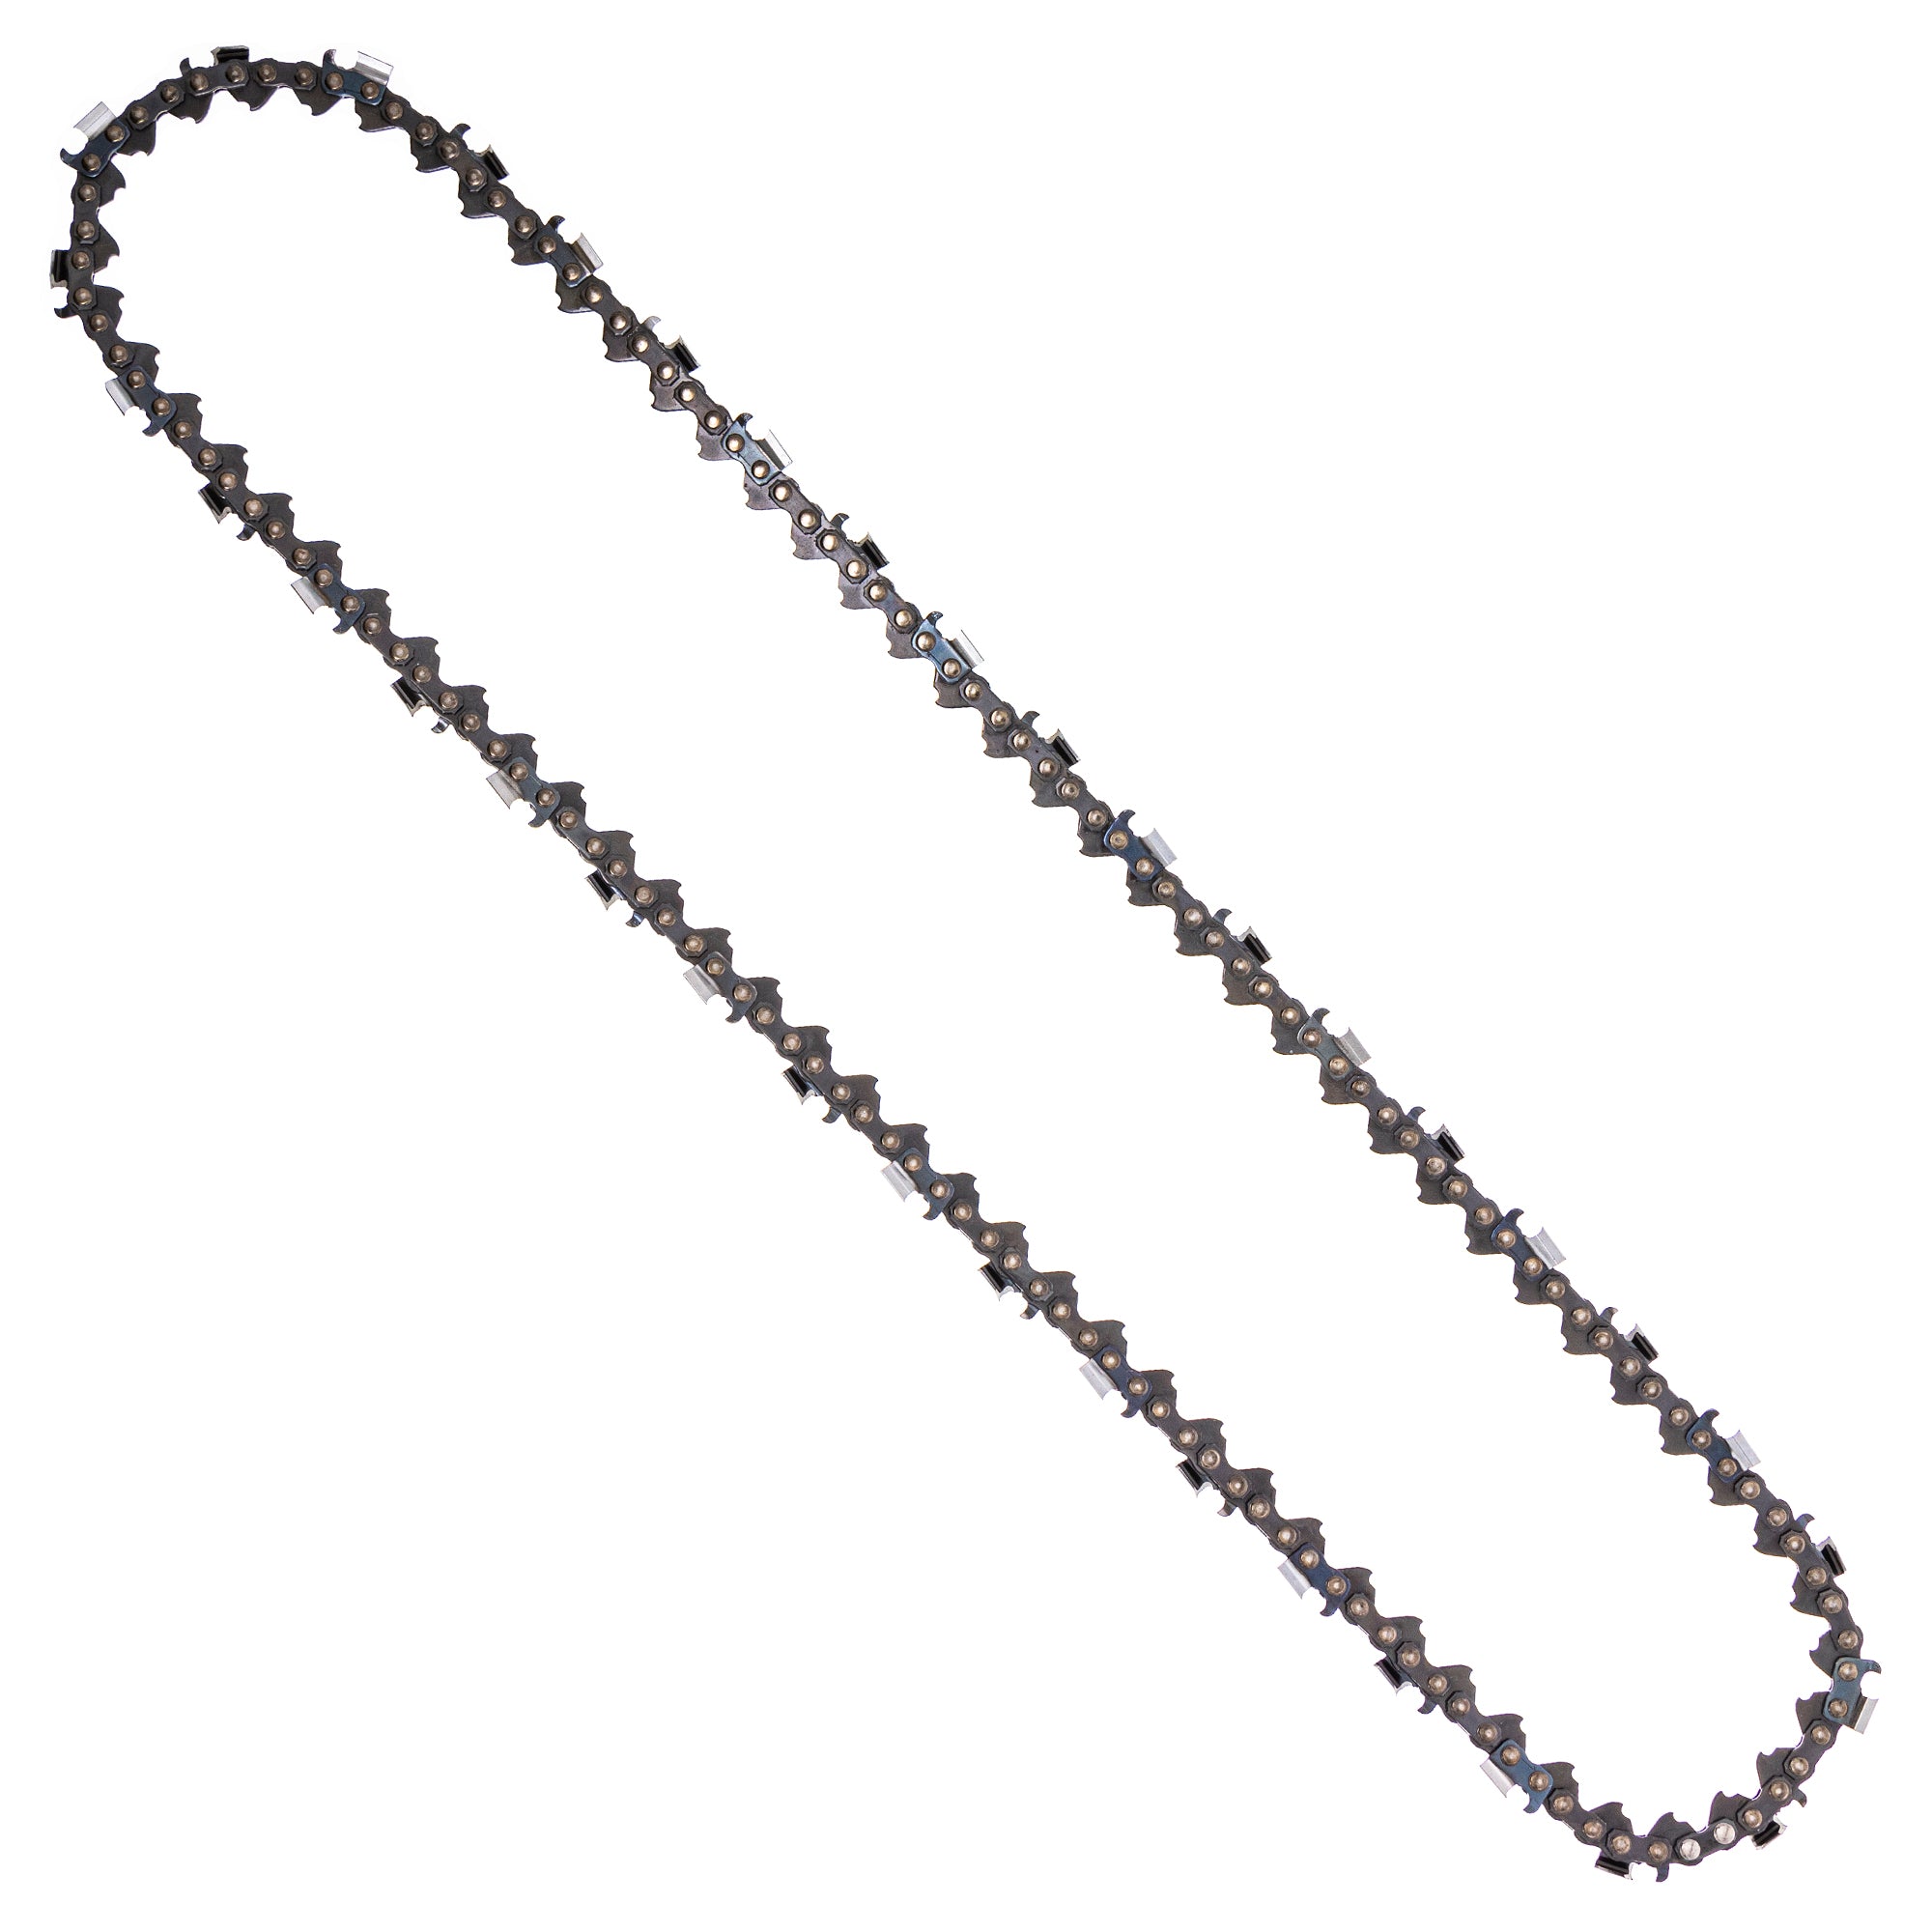 8TEN 810-CCC2221H Chain 4-Pack for zOTHER Windsor Stens Oregon GB